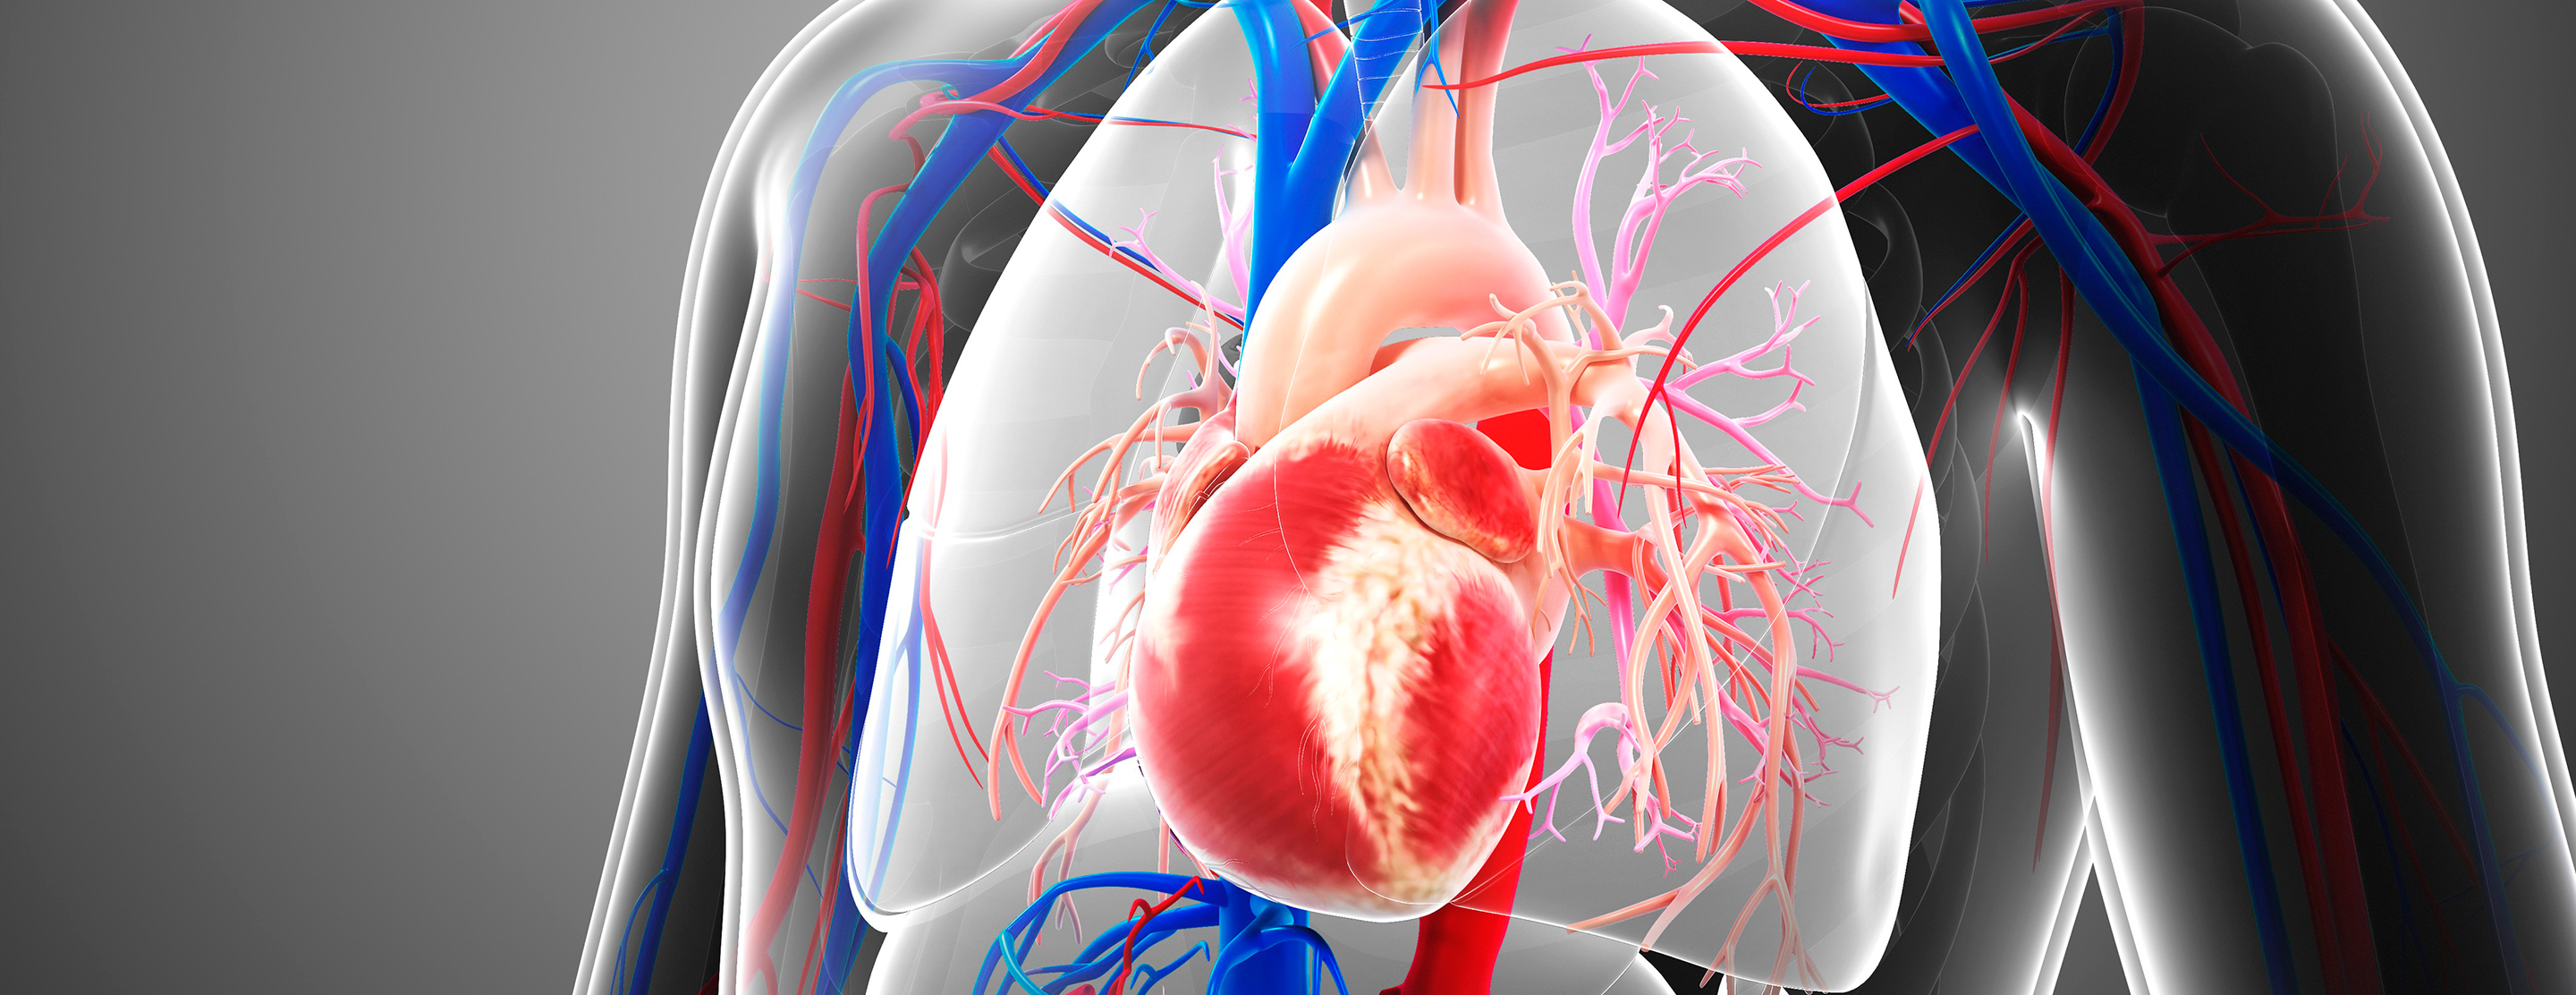 The Heart's Electrical System | Patient Education | UCSF Benioff Children's  Hospitals